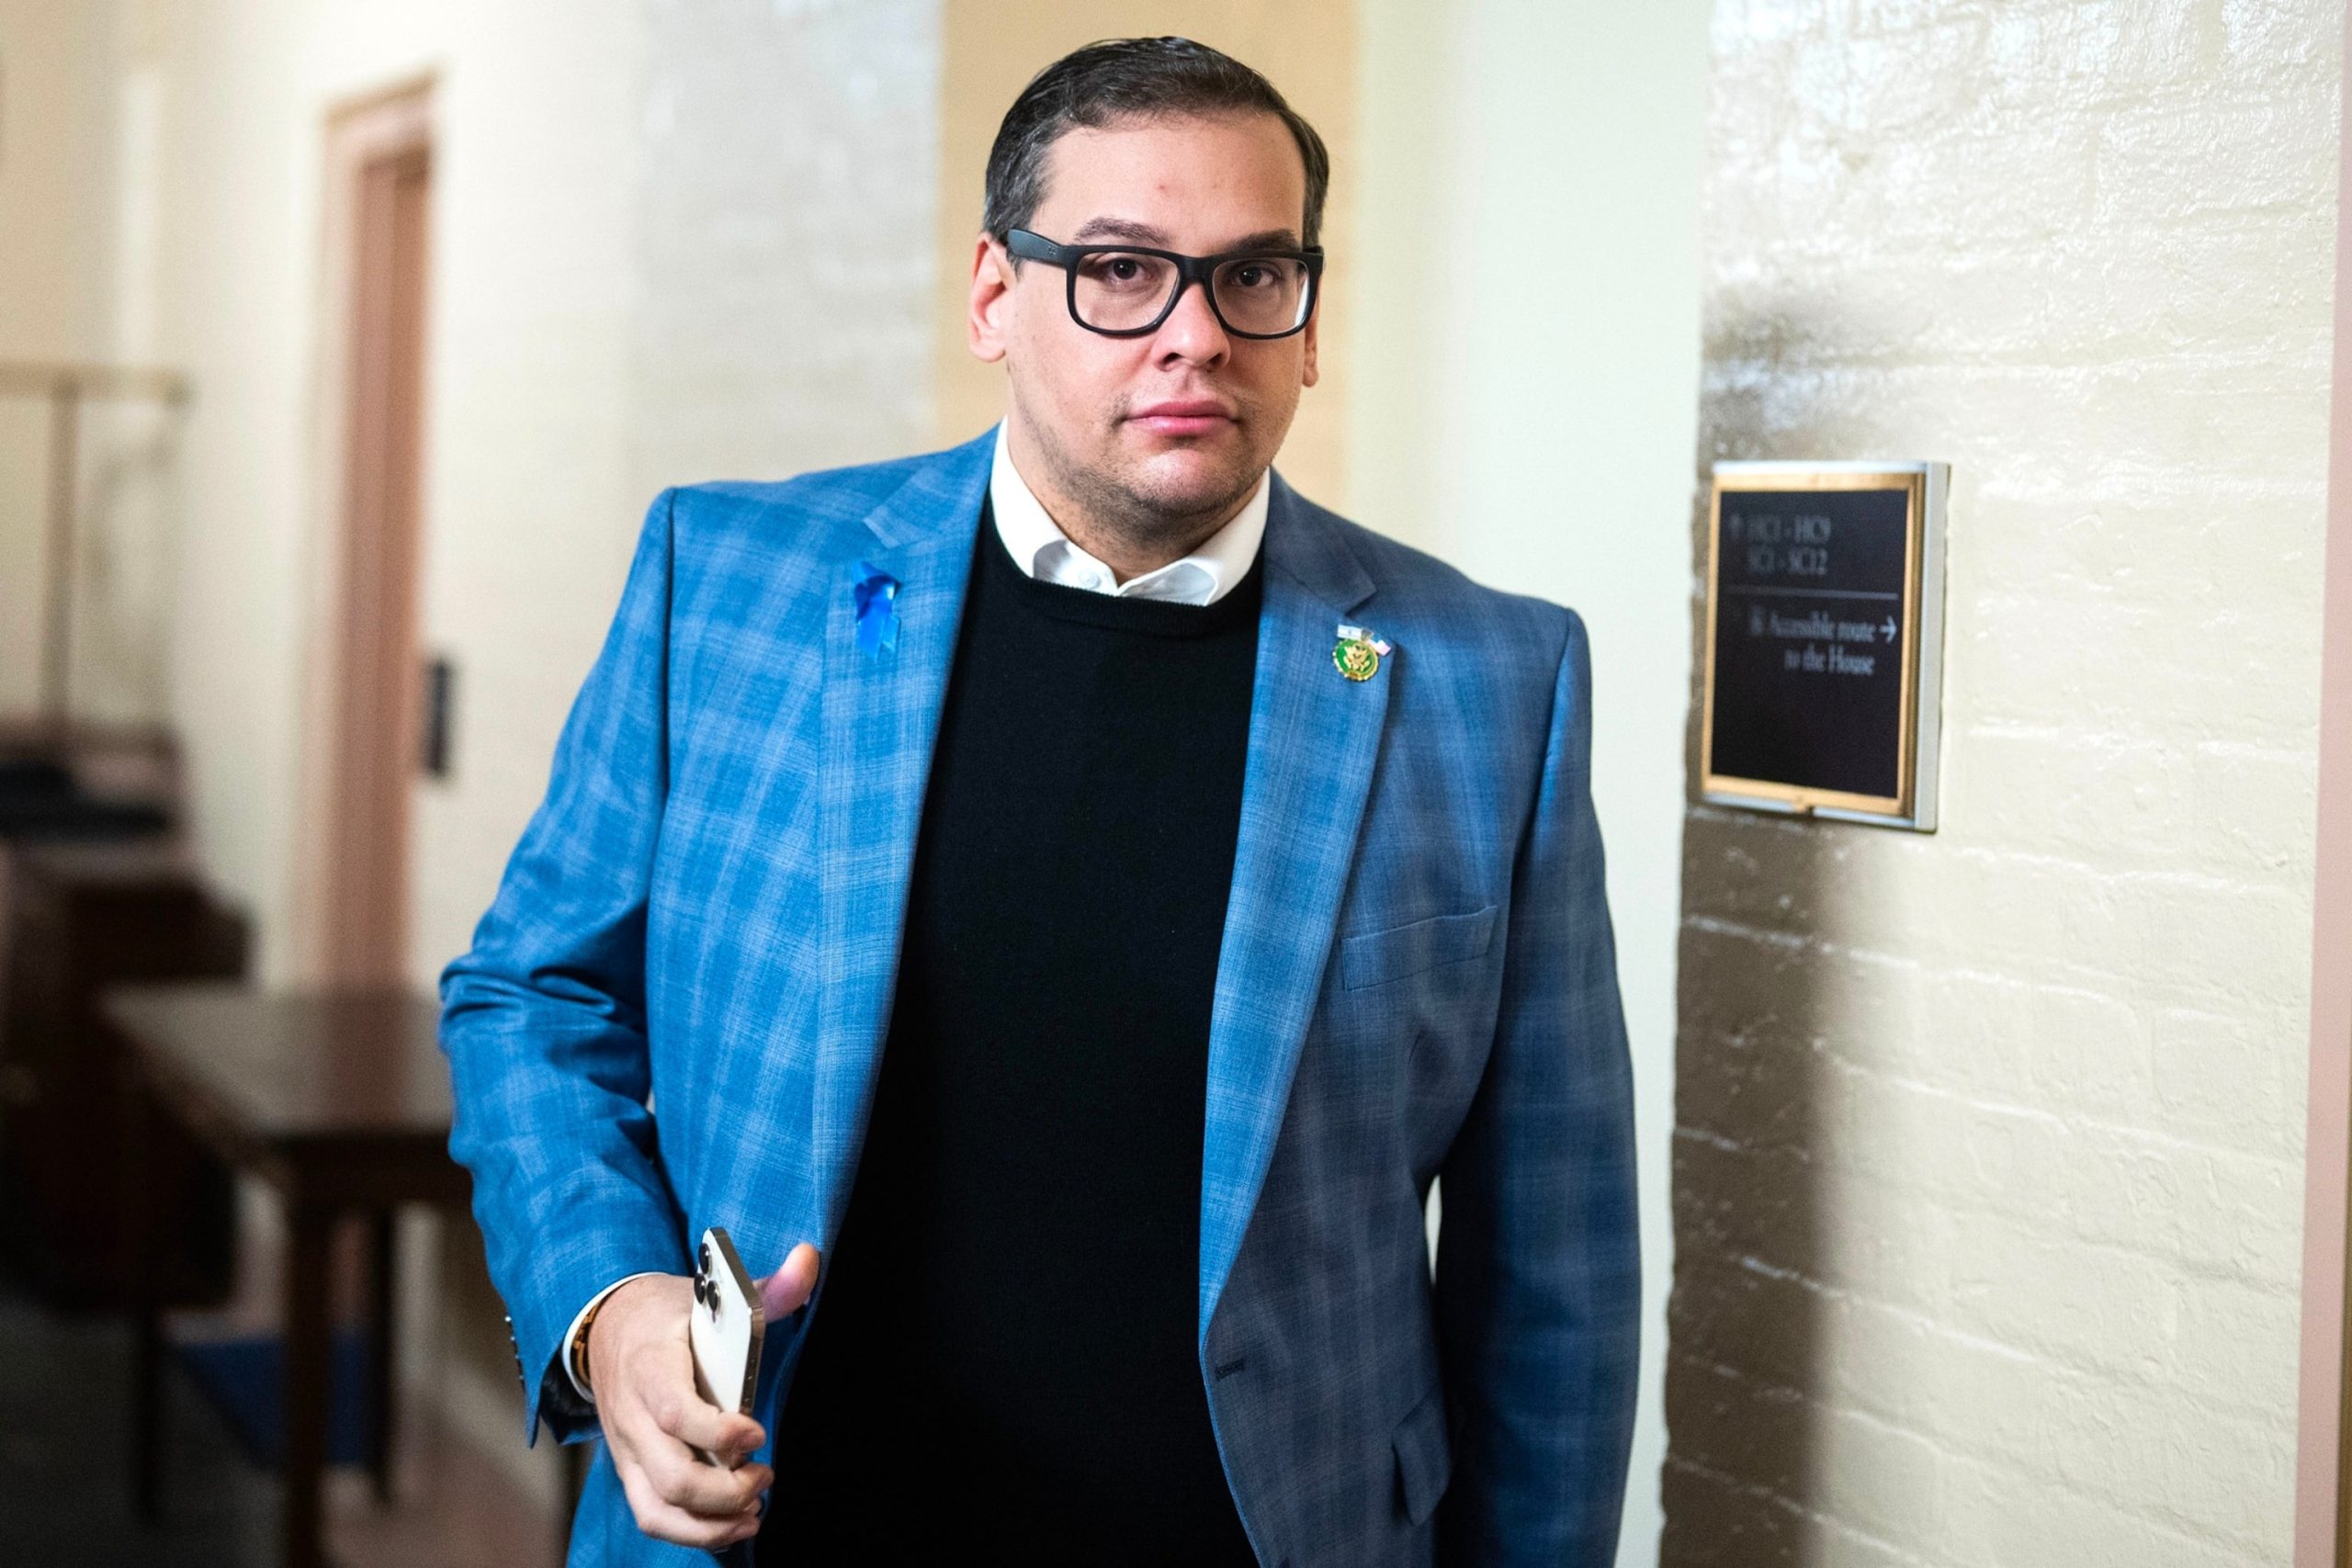 Rep. George Santos Unfazed by Likely Expulsion Vote